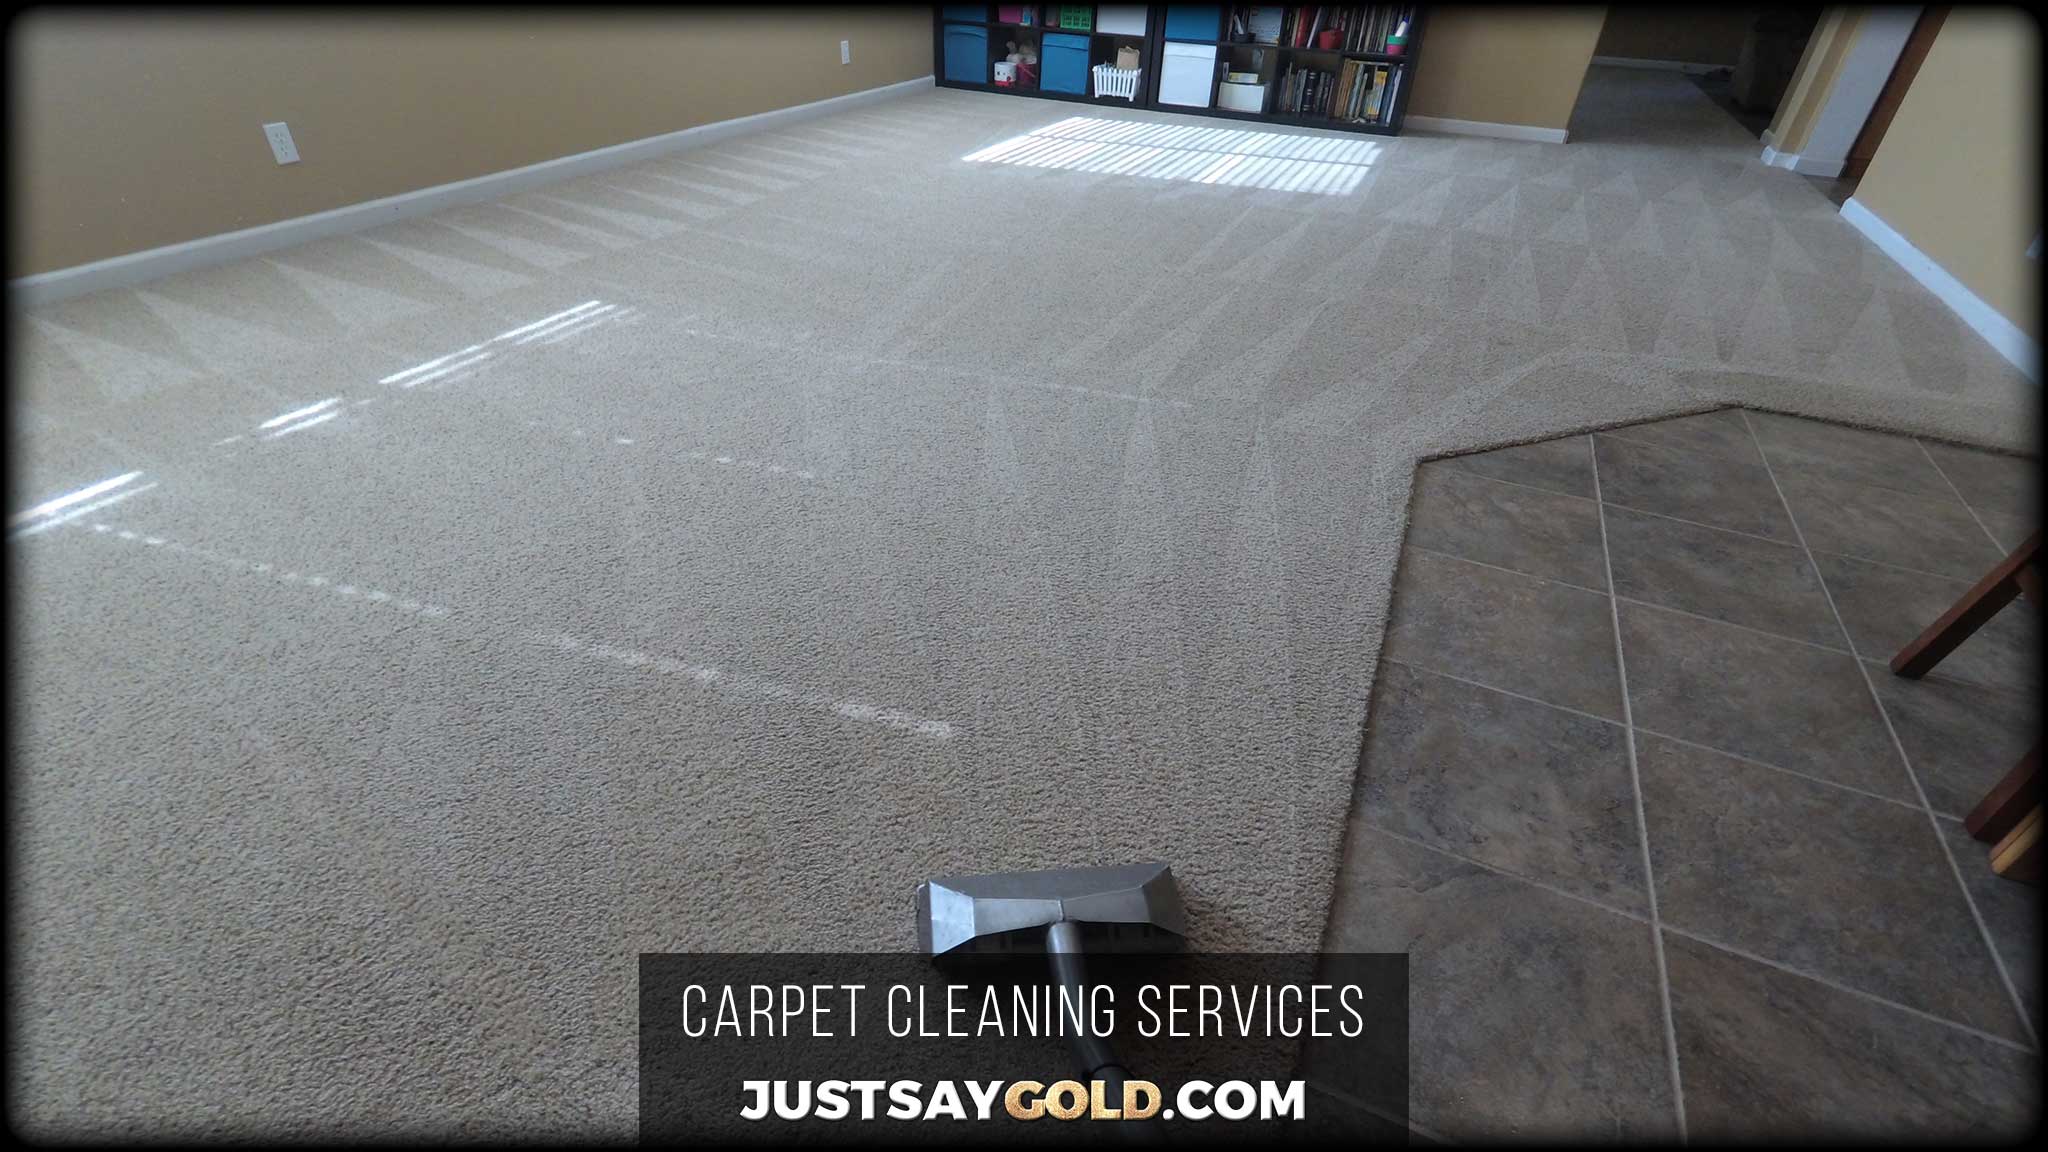 Carpet Cleaning Near Me - Carpet Cleaning in Los Angeles